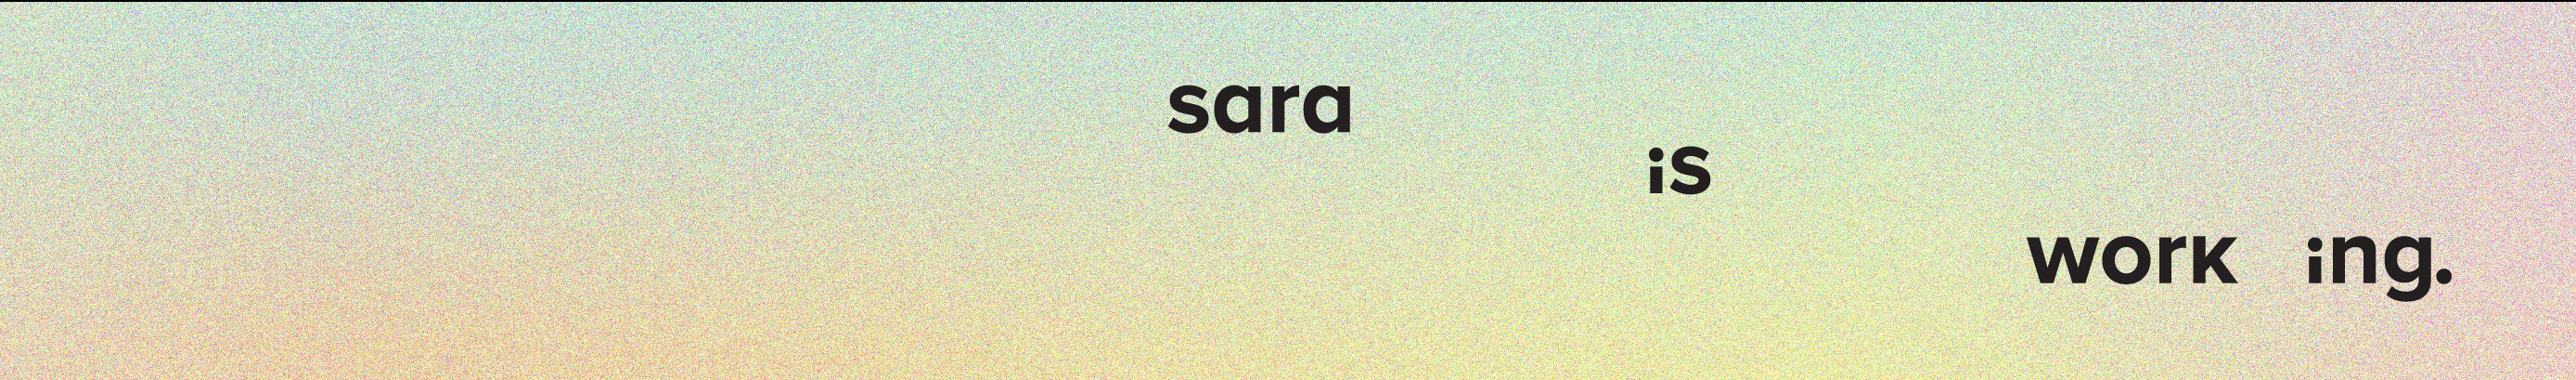 sara is working.'s profile banner